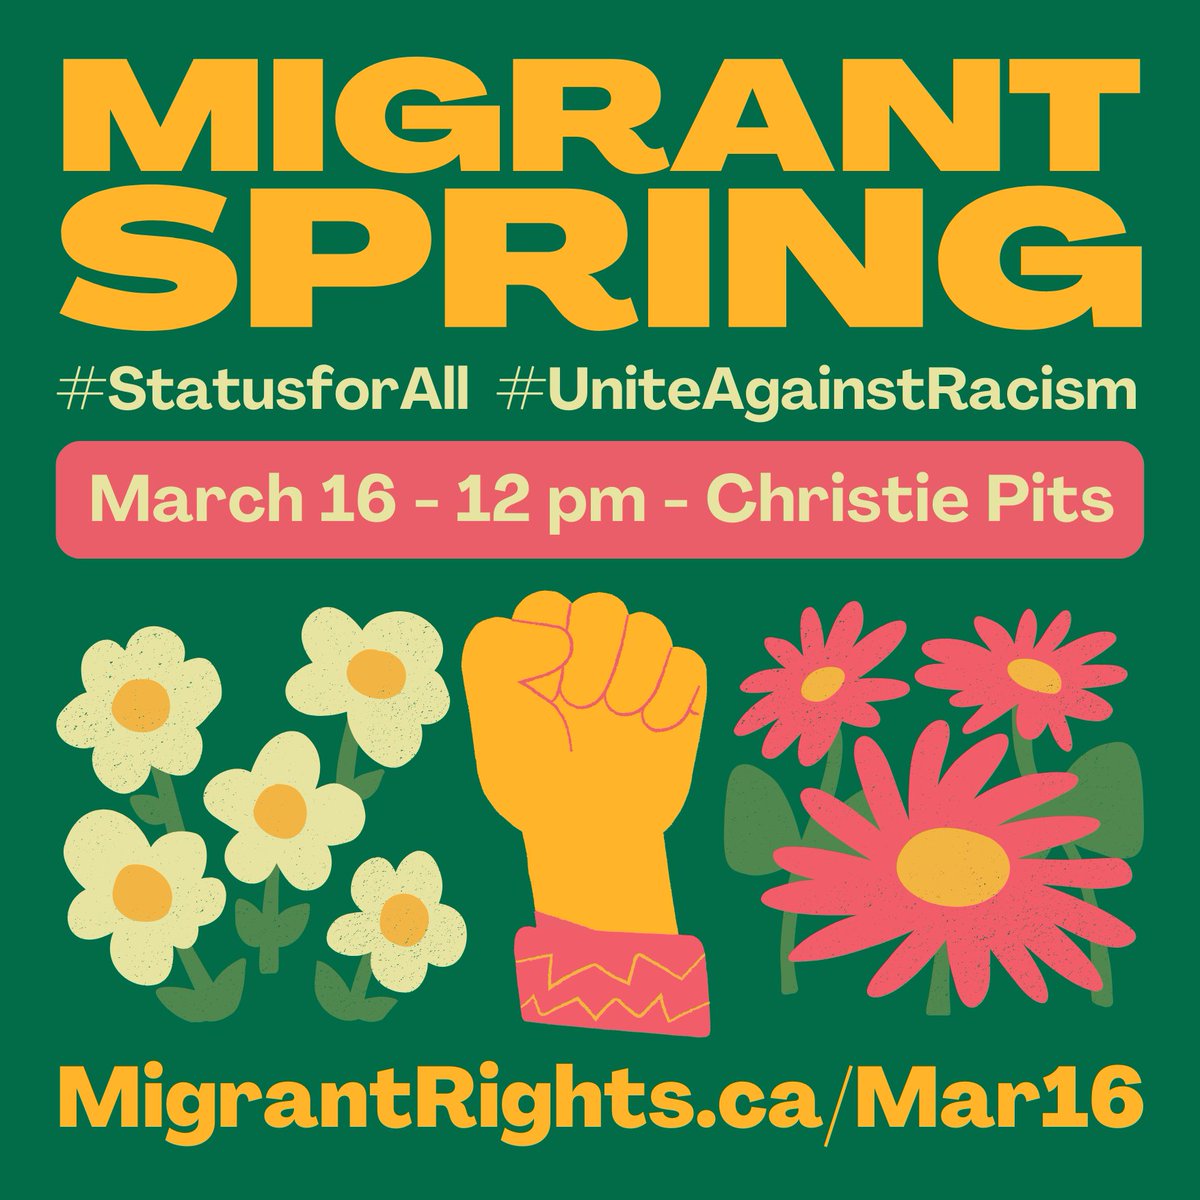 Rain, snow or shine! Join us this SATURDAY, MARCH 16 at 2PM at CHRISTIE PITS in TORONTO. We are launching #MigrantSpring to #UniteAgainstRacism and demand #StatusForAll. RSPV Now! MigrantRights.ca/Mar16. Let's make this massive!